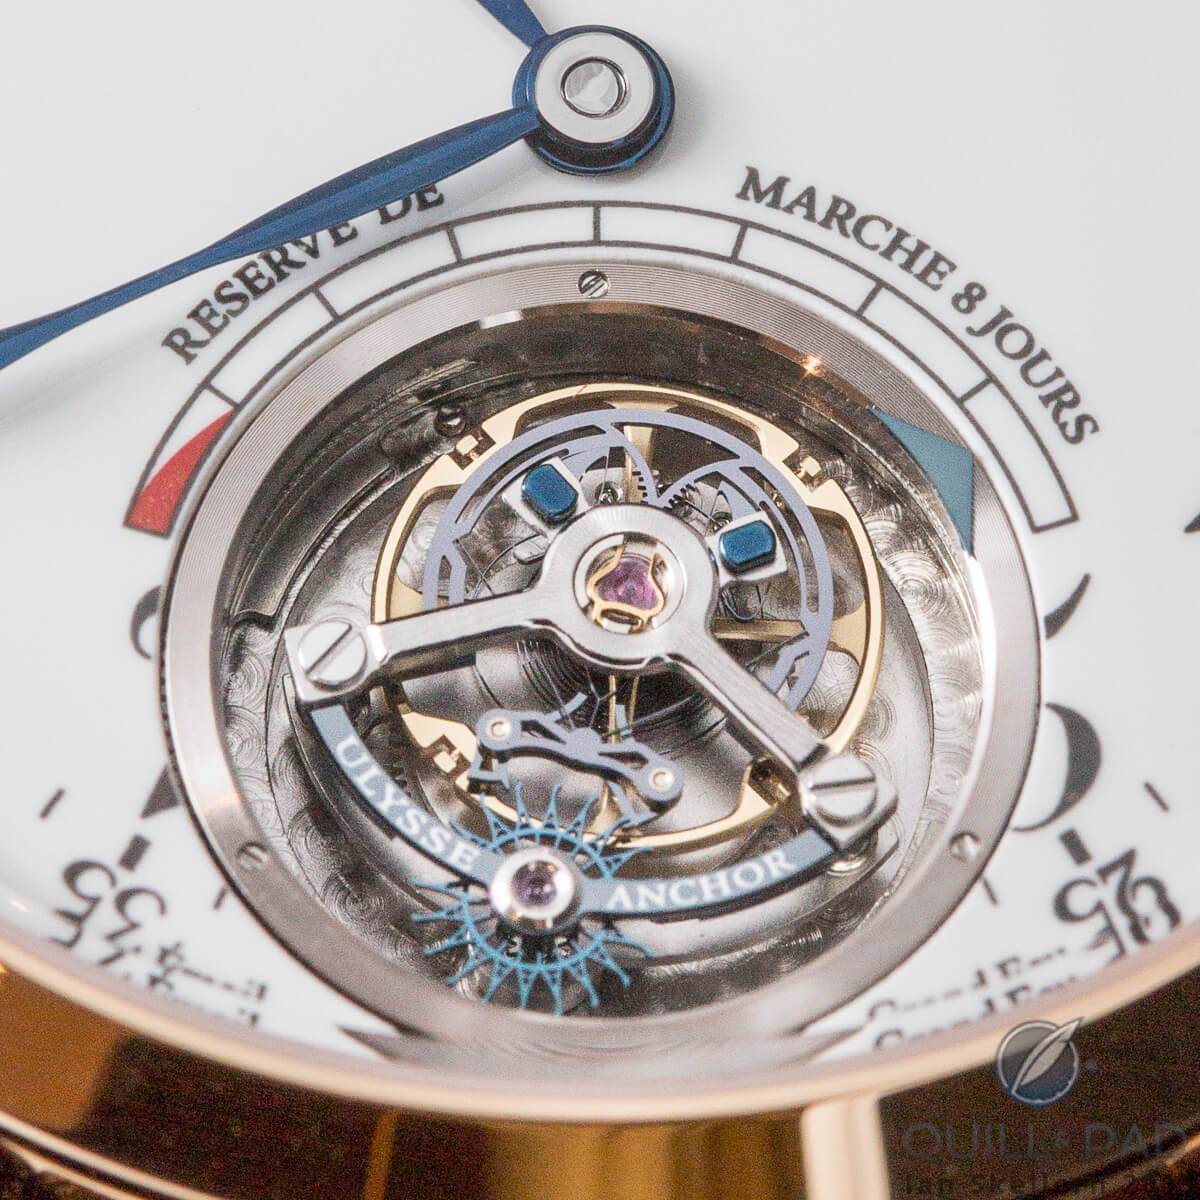 Close up look at the tourbillon and escapement of the Ulysse Nardin Anchor Tourbillon